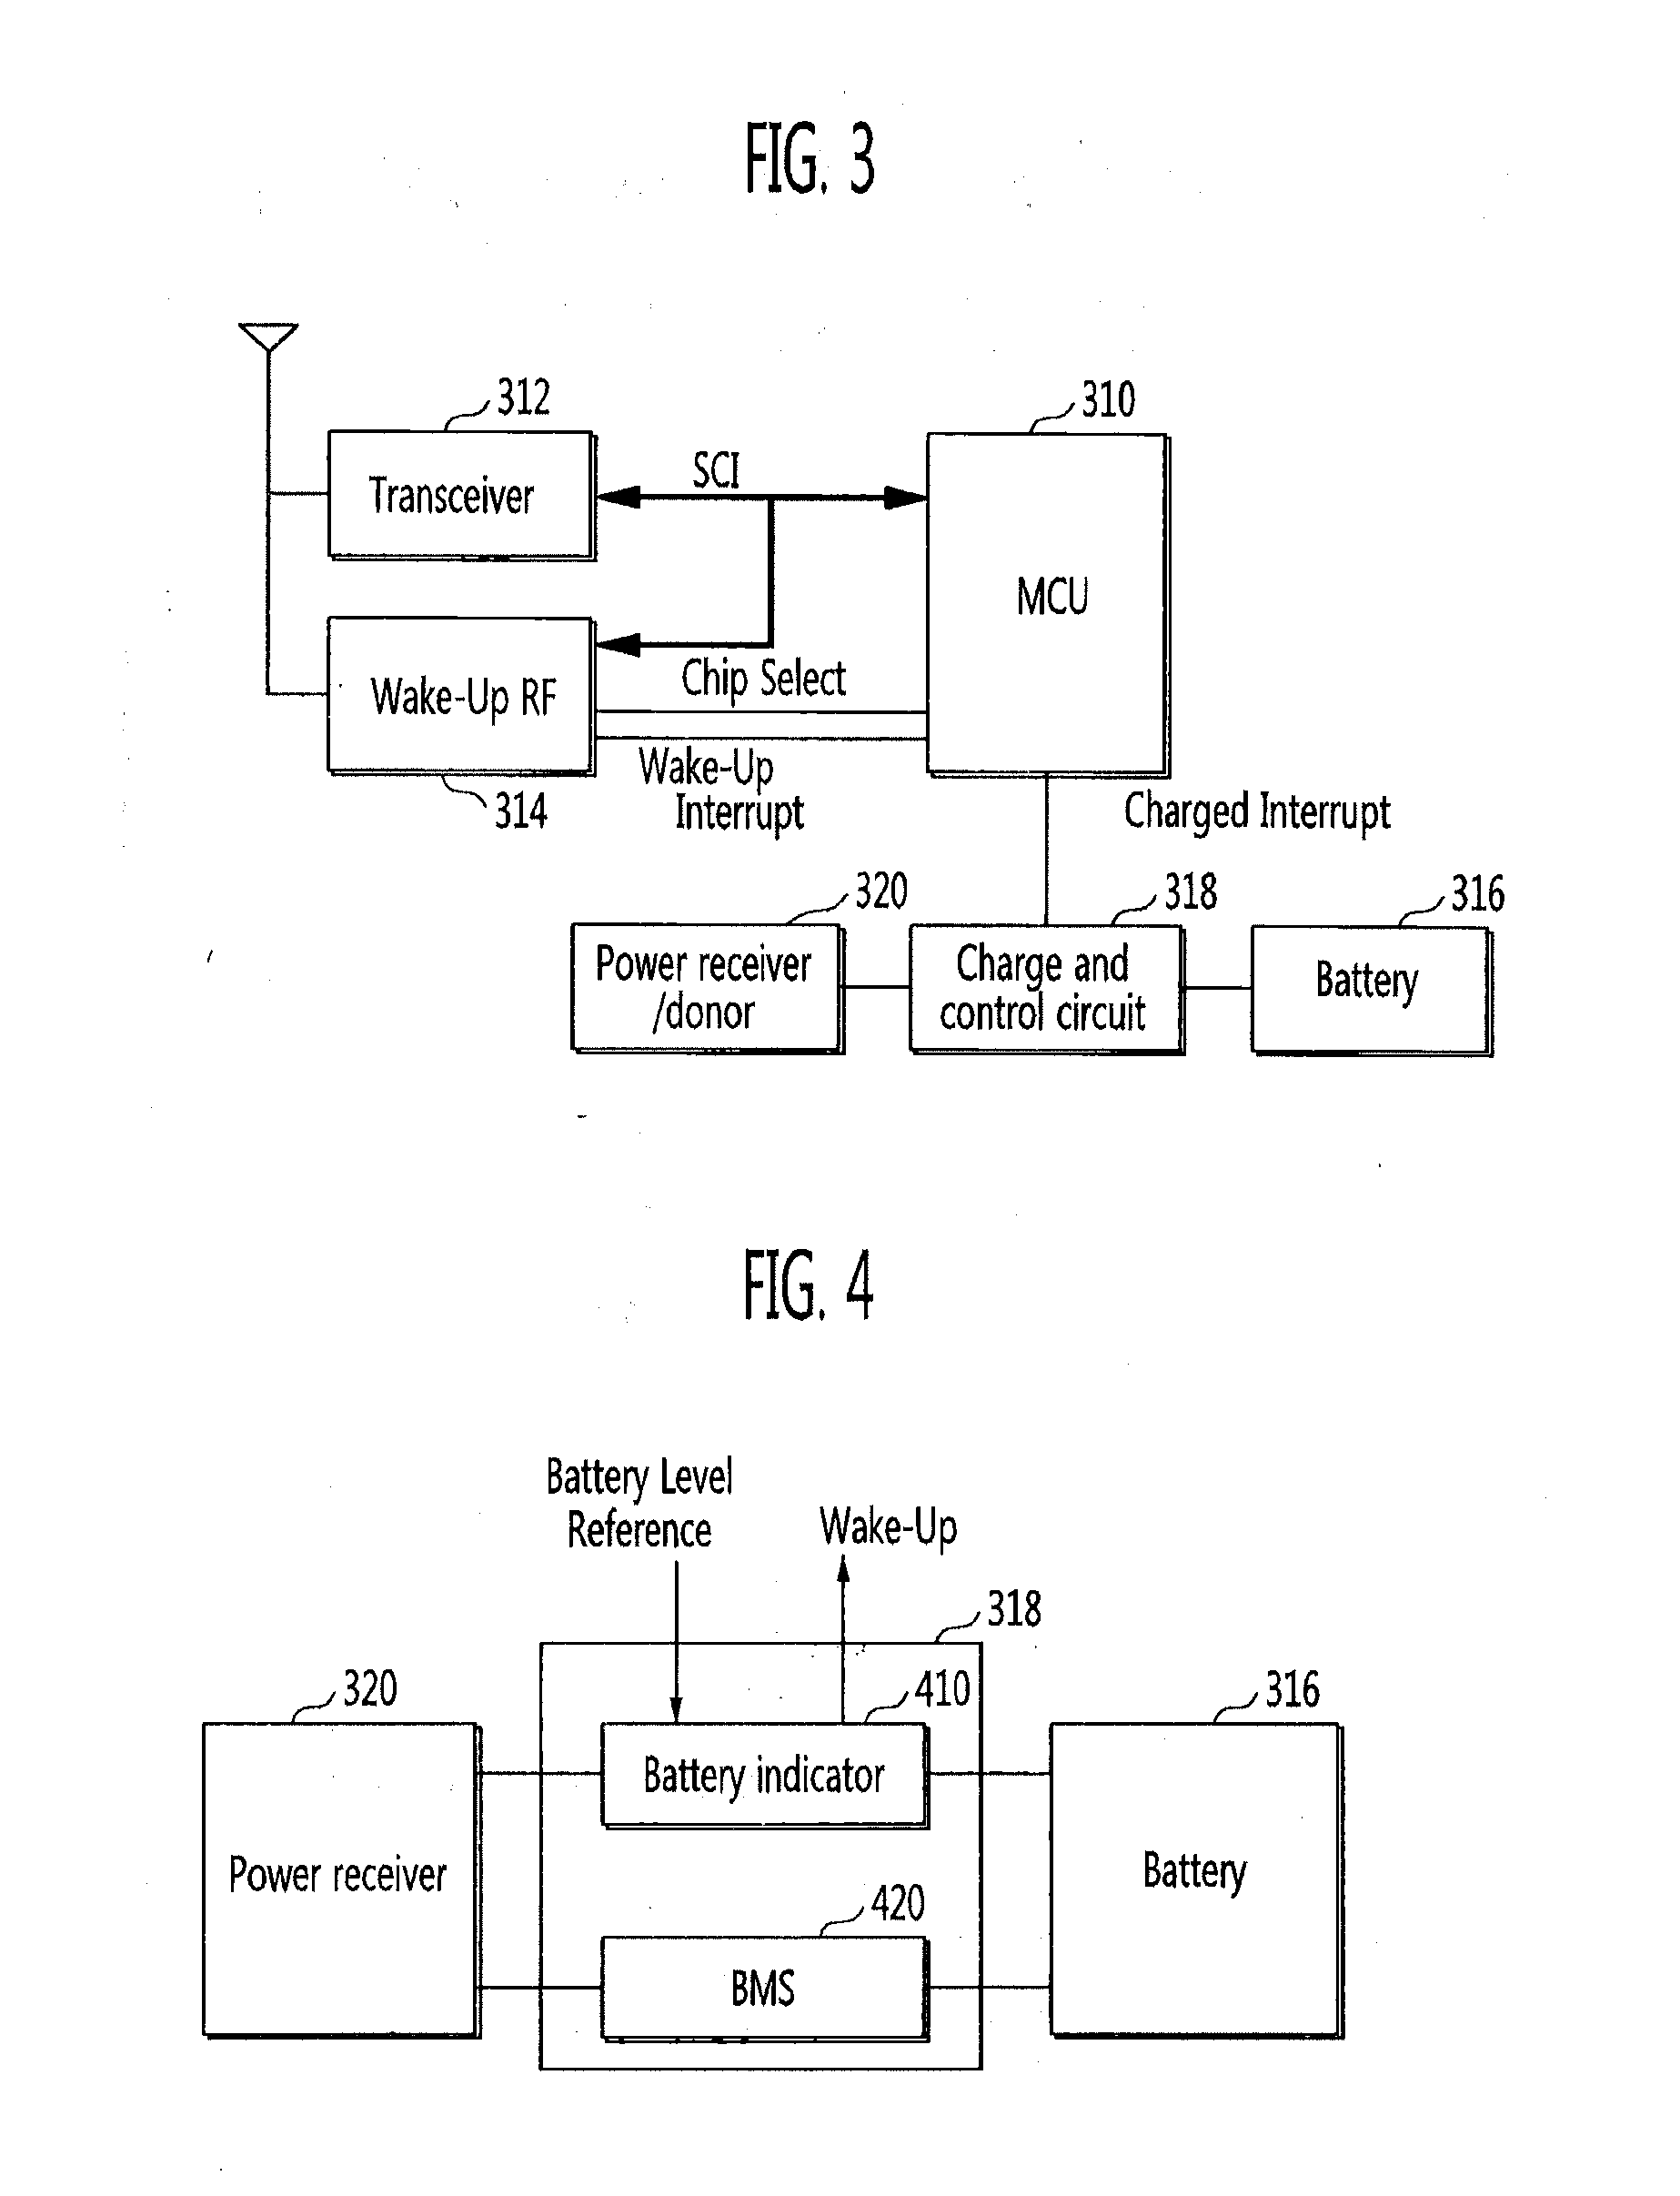 Apparatus and method for charging internal battery in wireless sensor network